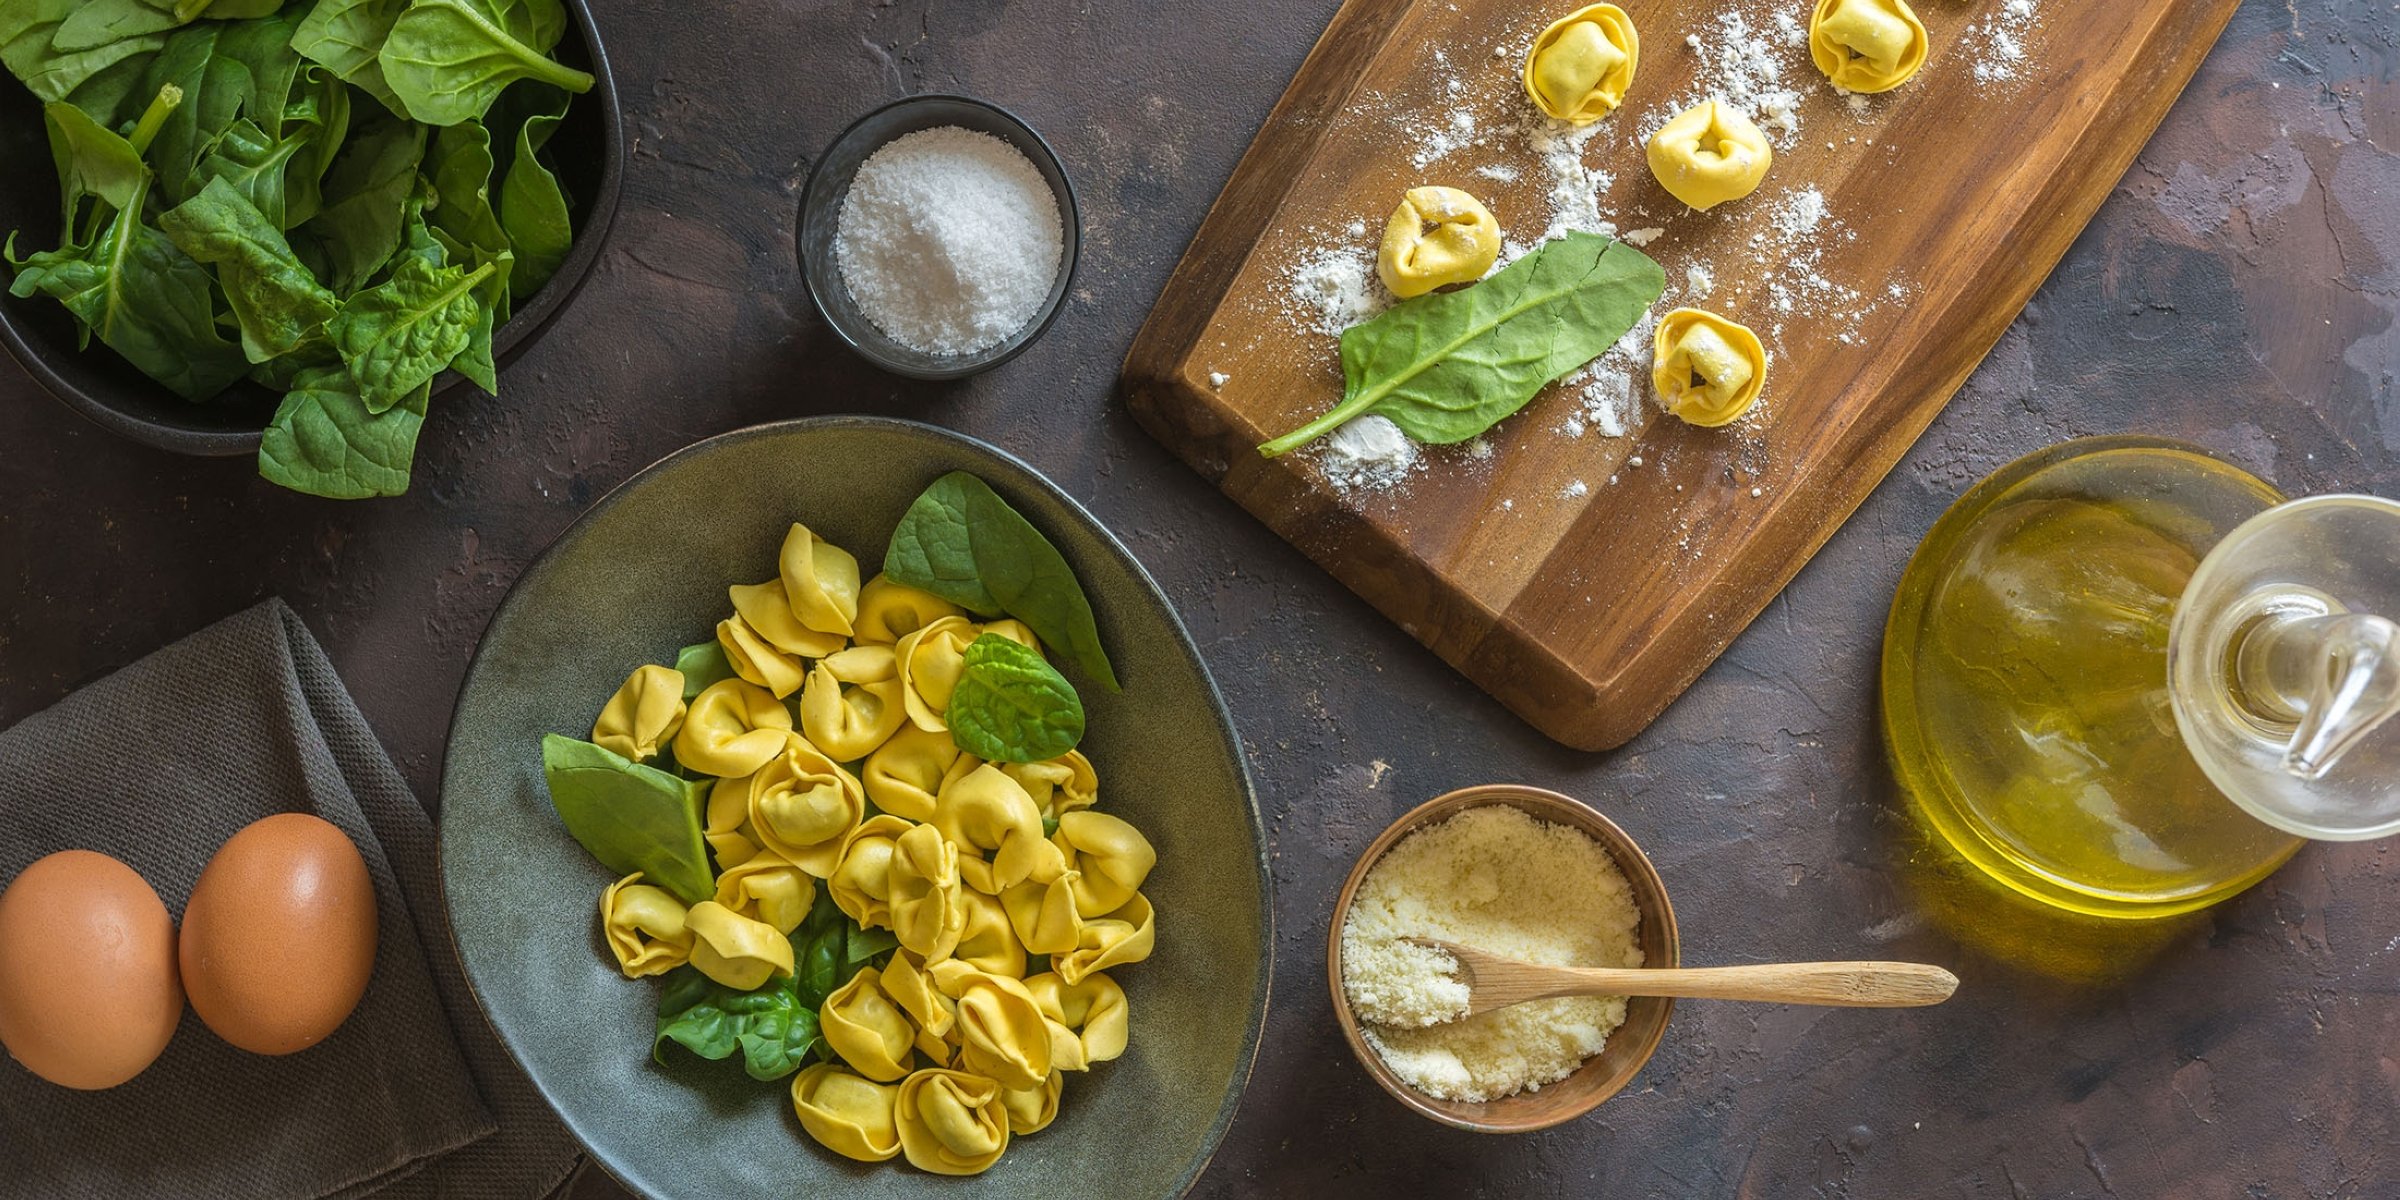 Tortellini and mantı: Stuffed pasta cousins and their recipes | Daily Sabah